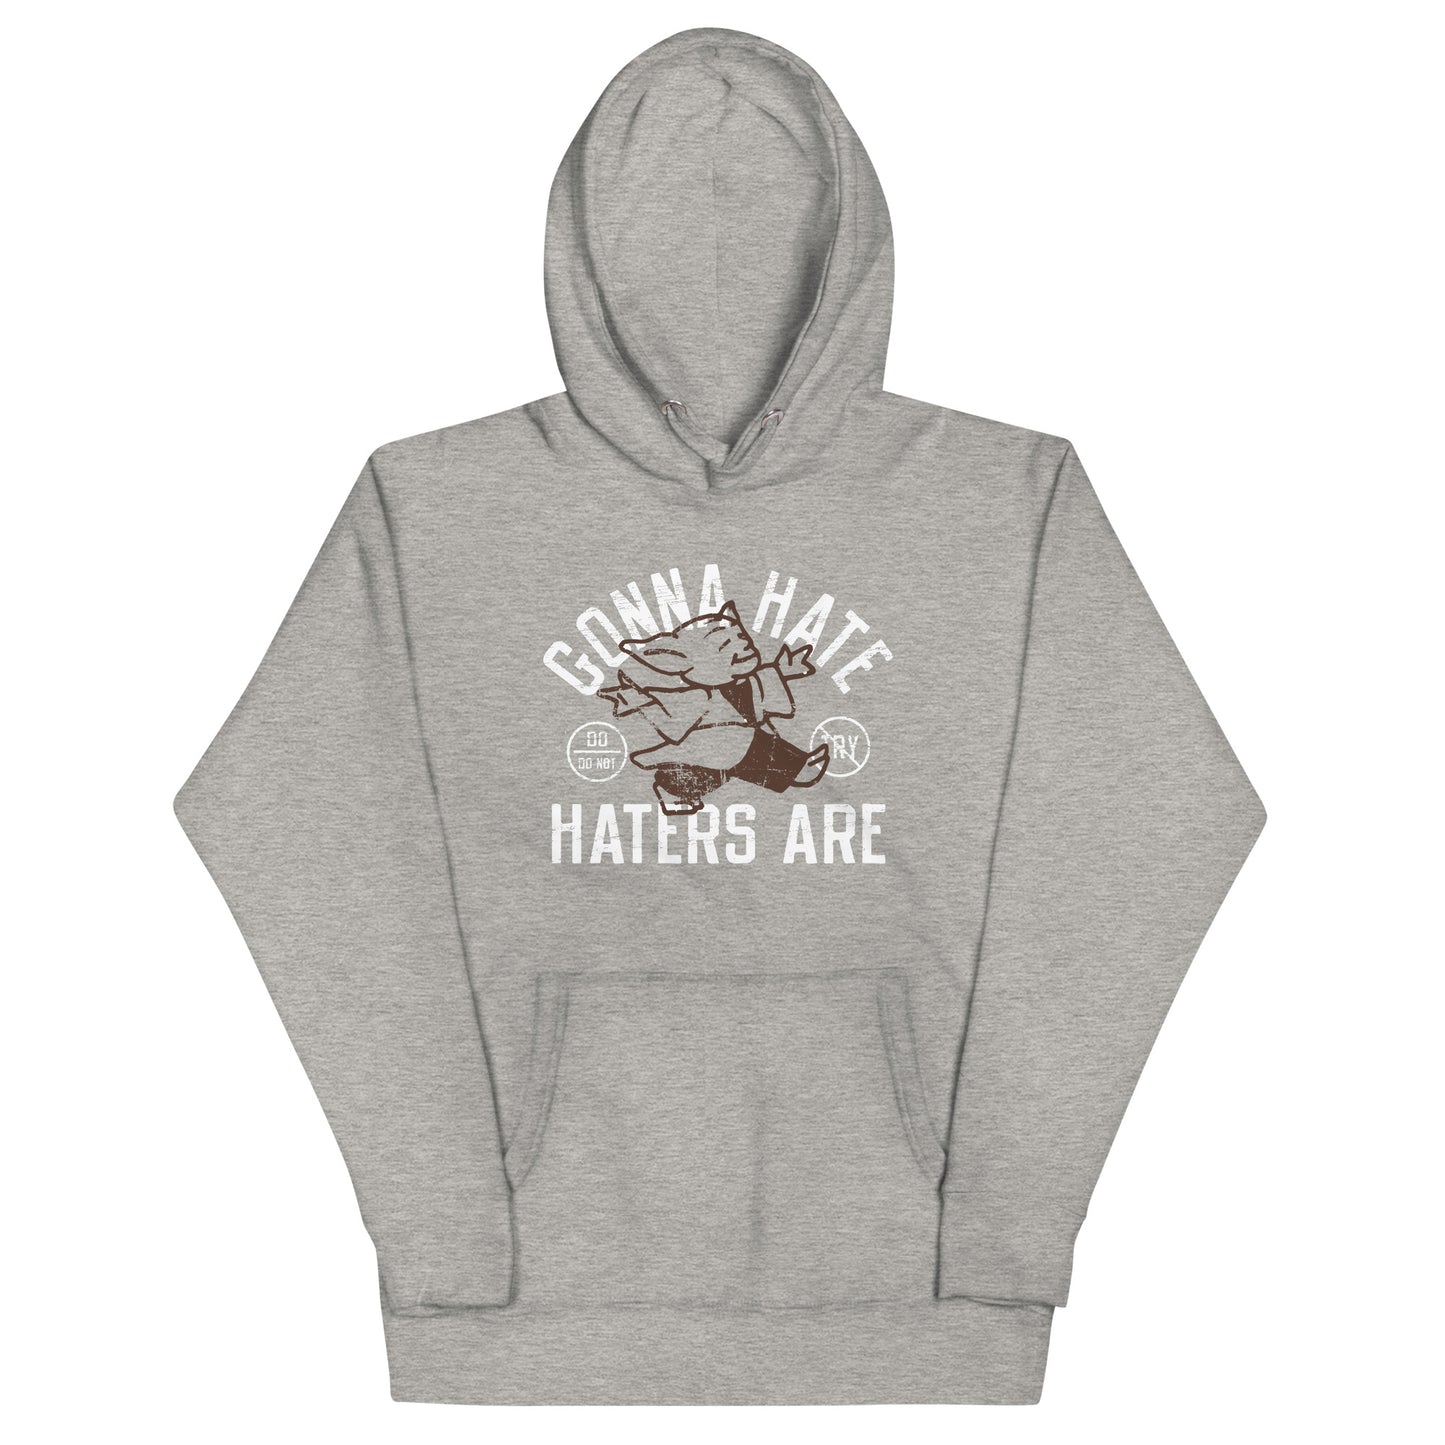 Gonna Hate Haters Are Unisex Hoodie